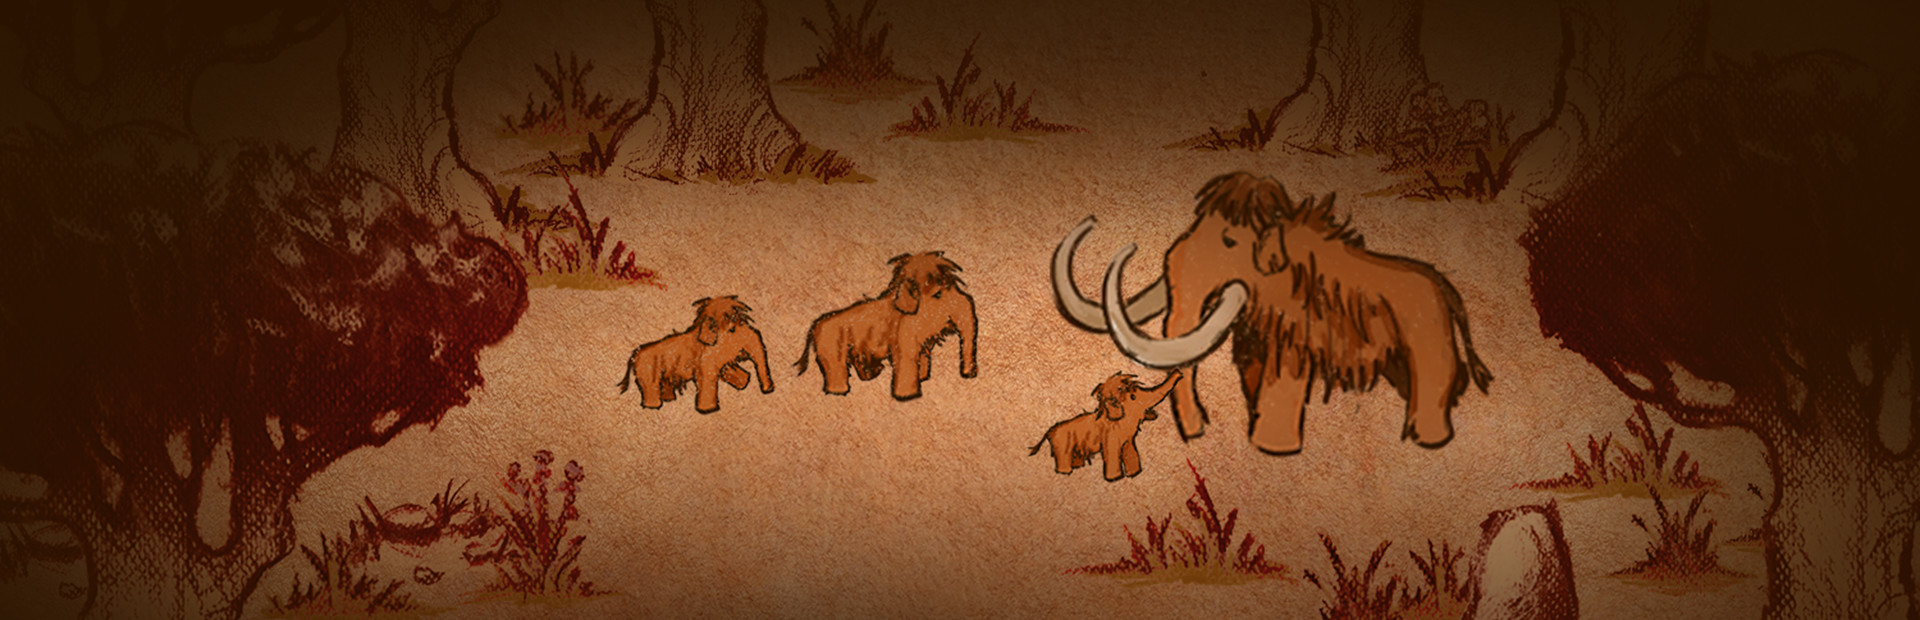 The Mammoth: A Cave Painting cover image